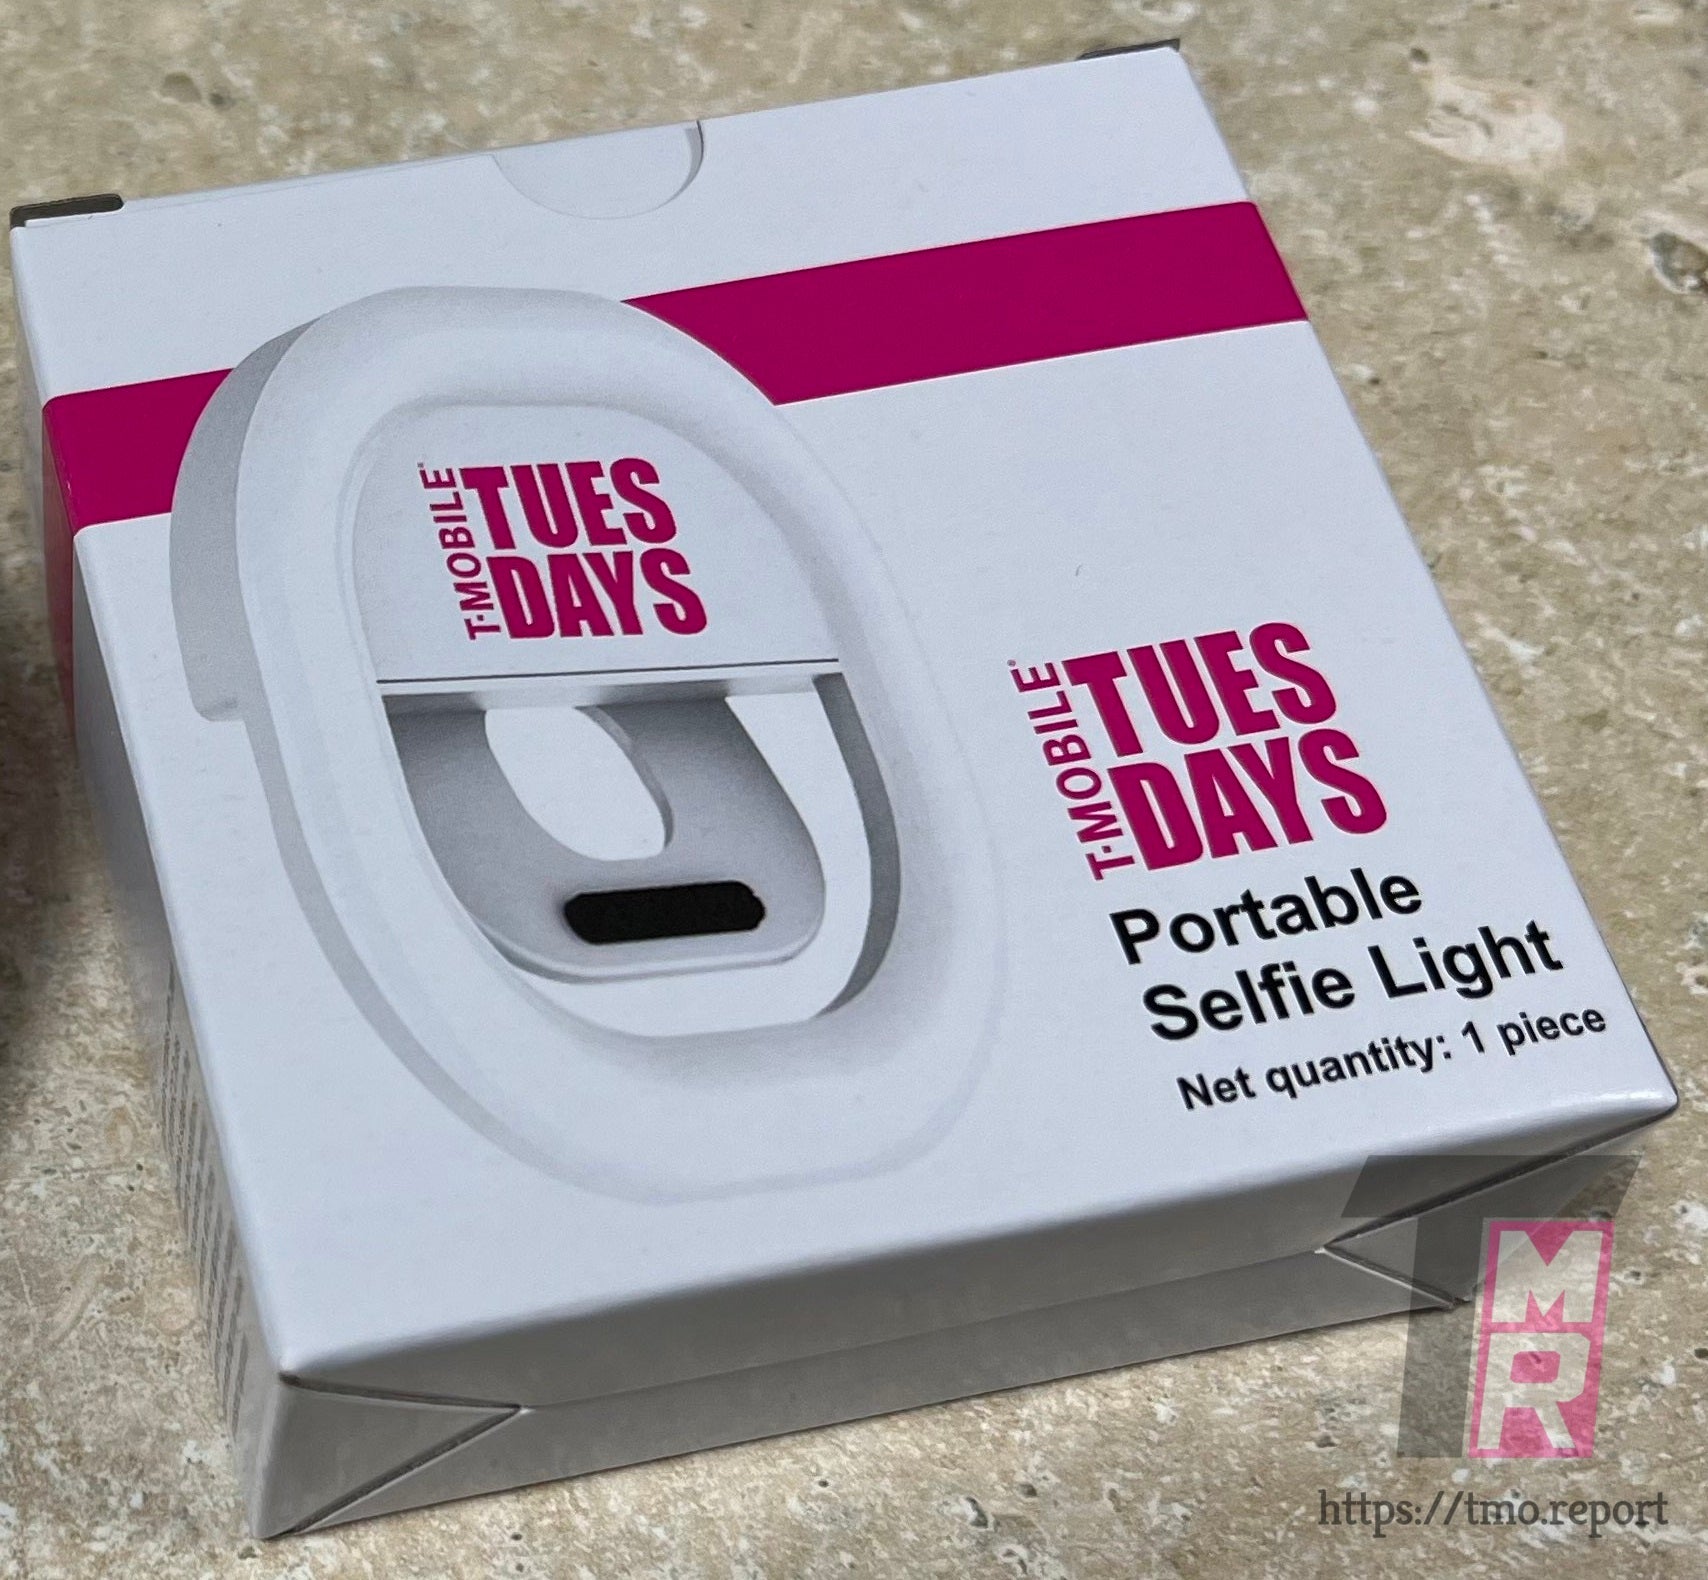 T-Mobile will soon give away a free Selfie Light to customers as part of its rewards program - T-Mobile customers will soon receive a useful gift via the carrier's weekly rewards program